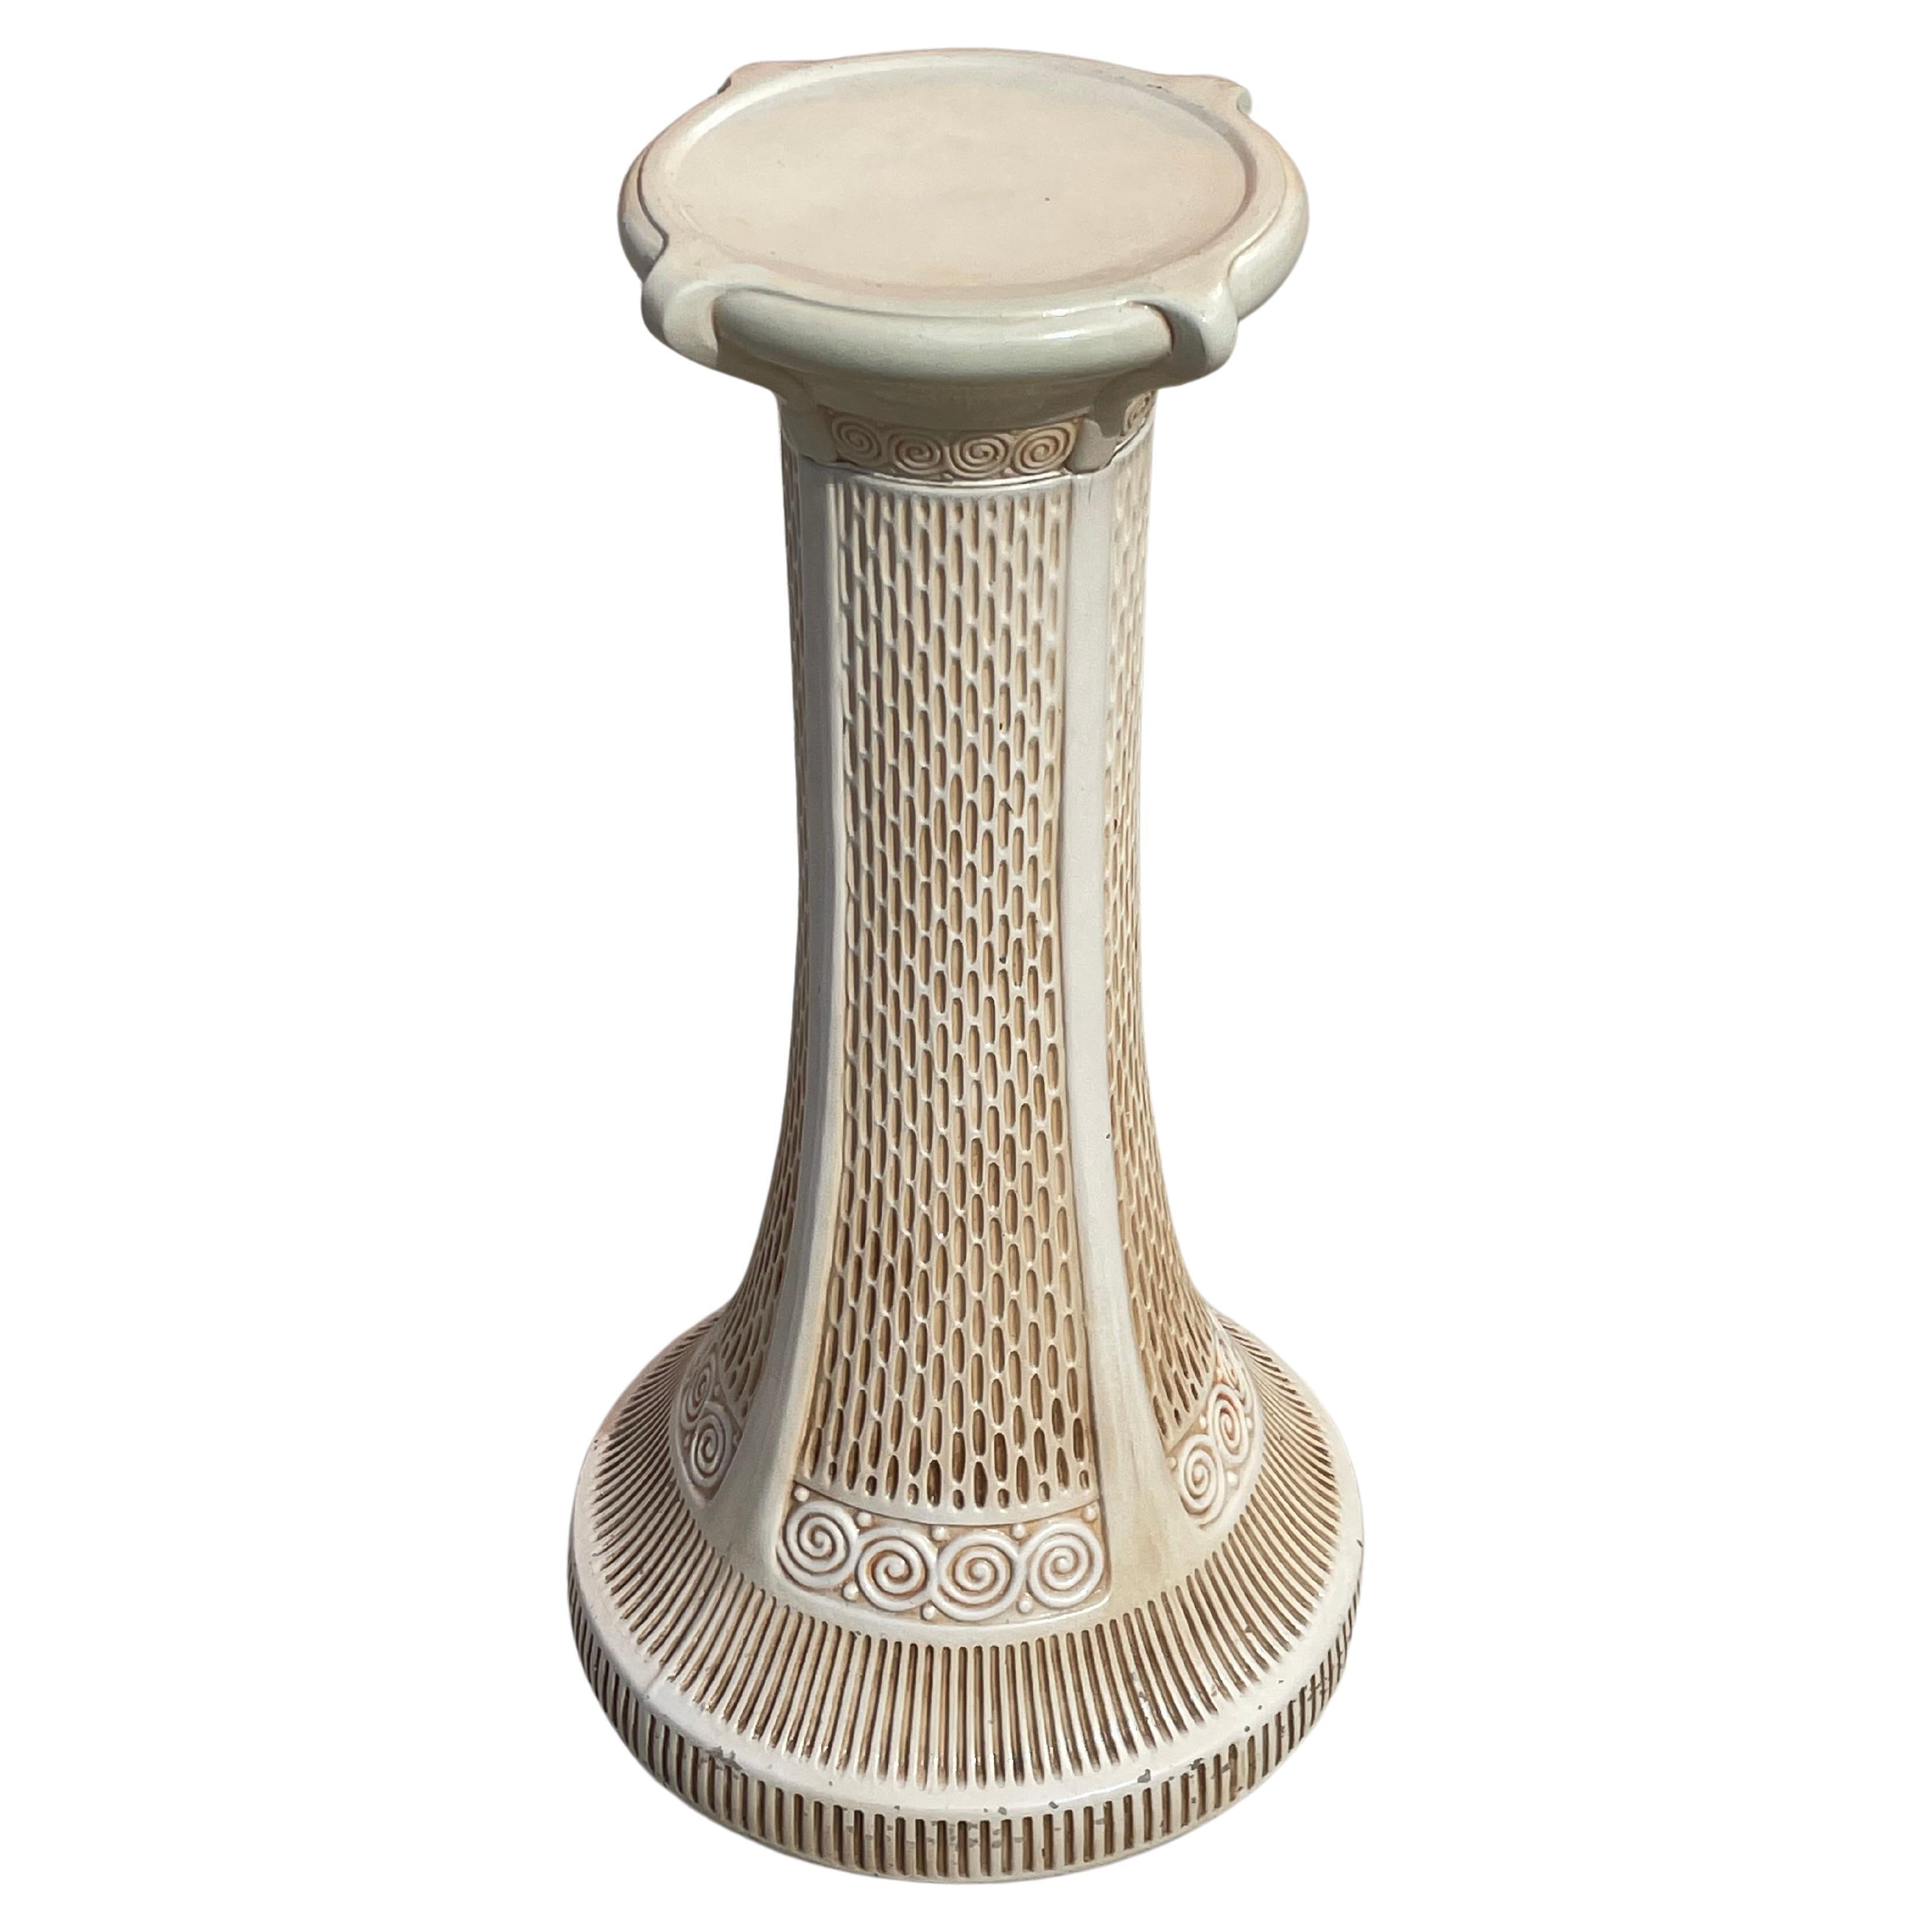 Ceramic Pedestal Plant Stand Plinth Made in England 